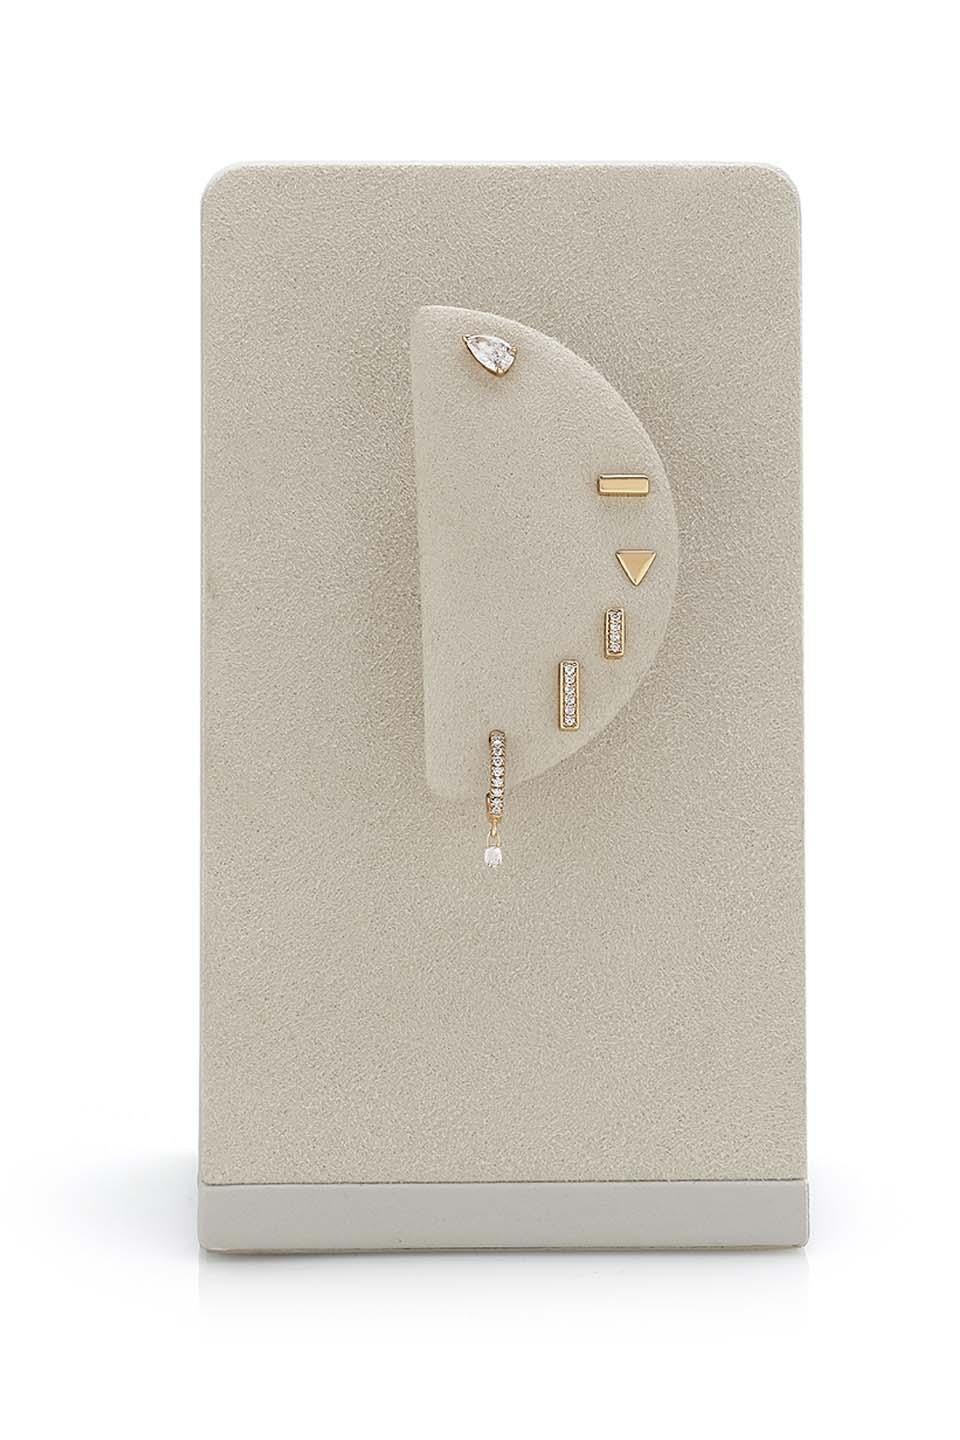 Kensington Piramide Earrings Full Diamonds / Rose Gold. Drop earrings with white diamonds (0,52 ct.) set in rose gold 18Kt.
Kensington, a new British redesign collection inspired by Kensington Gardens. Bracelets, earrings, necklaces and rings, gold